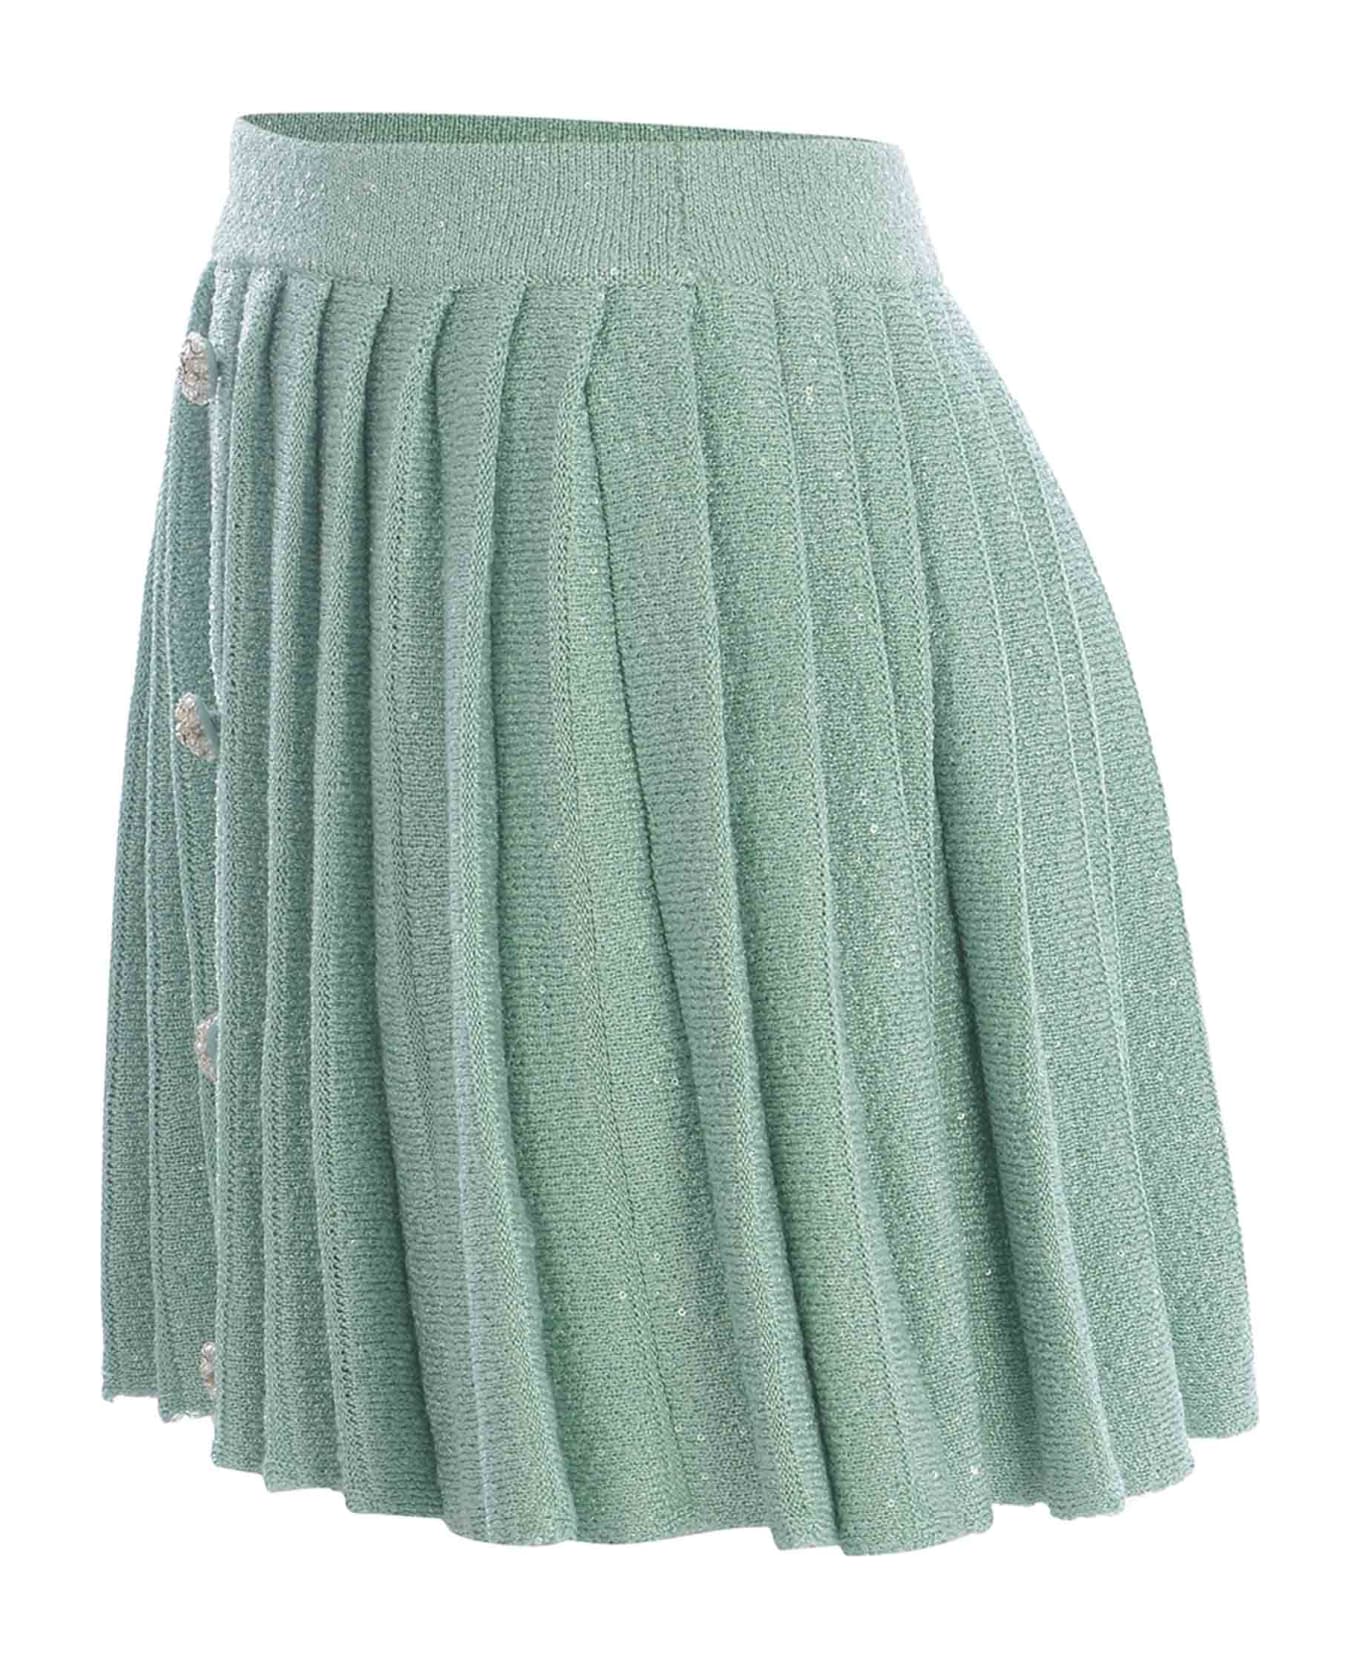 self-portrait Skirt Self-portrait "pailettes" Made Of Knitted Fabric - Verde menta